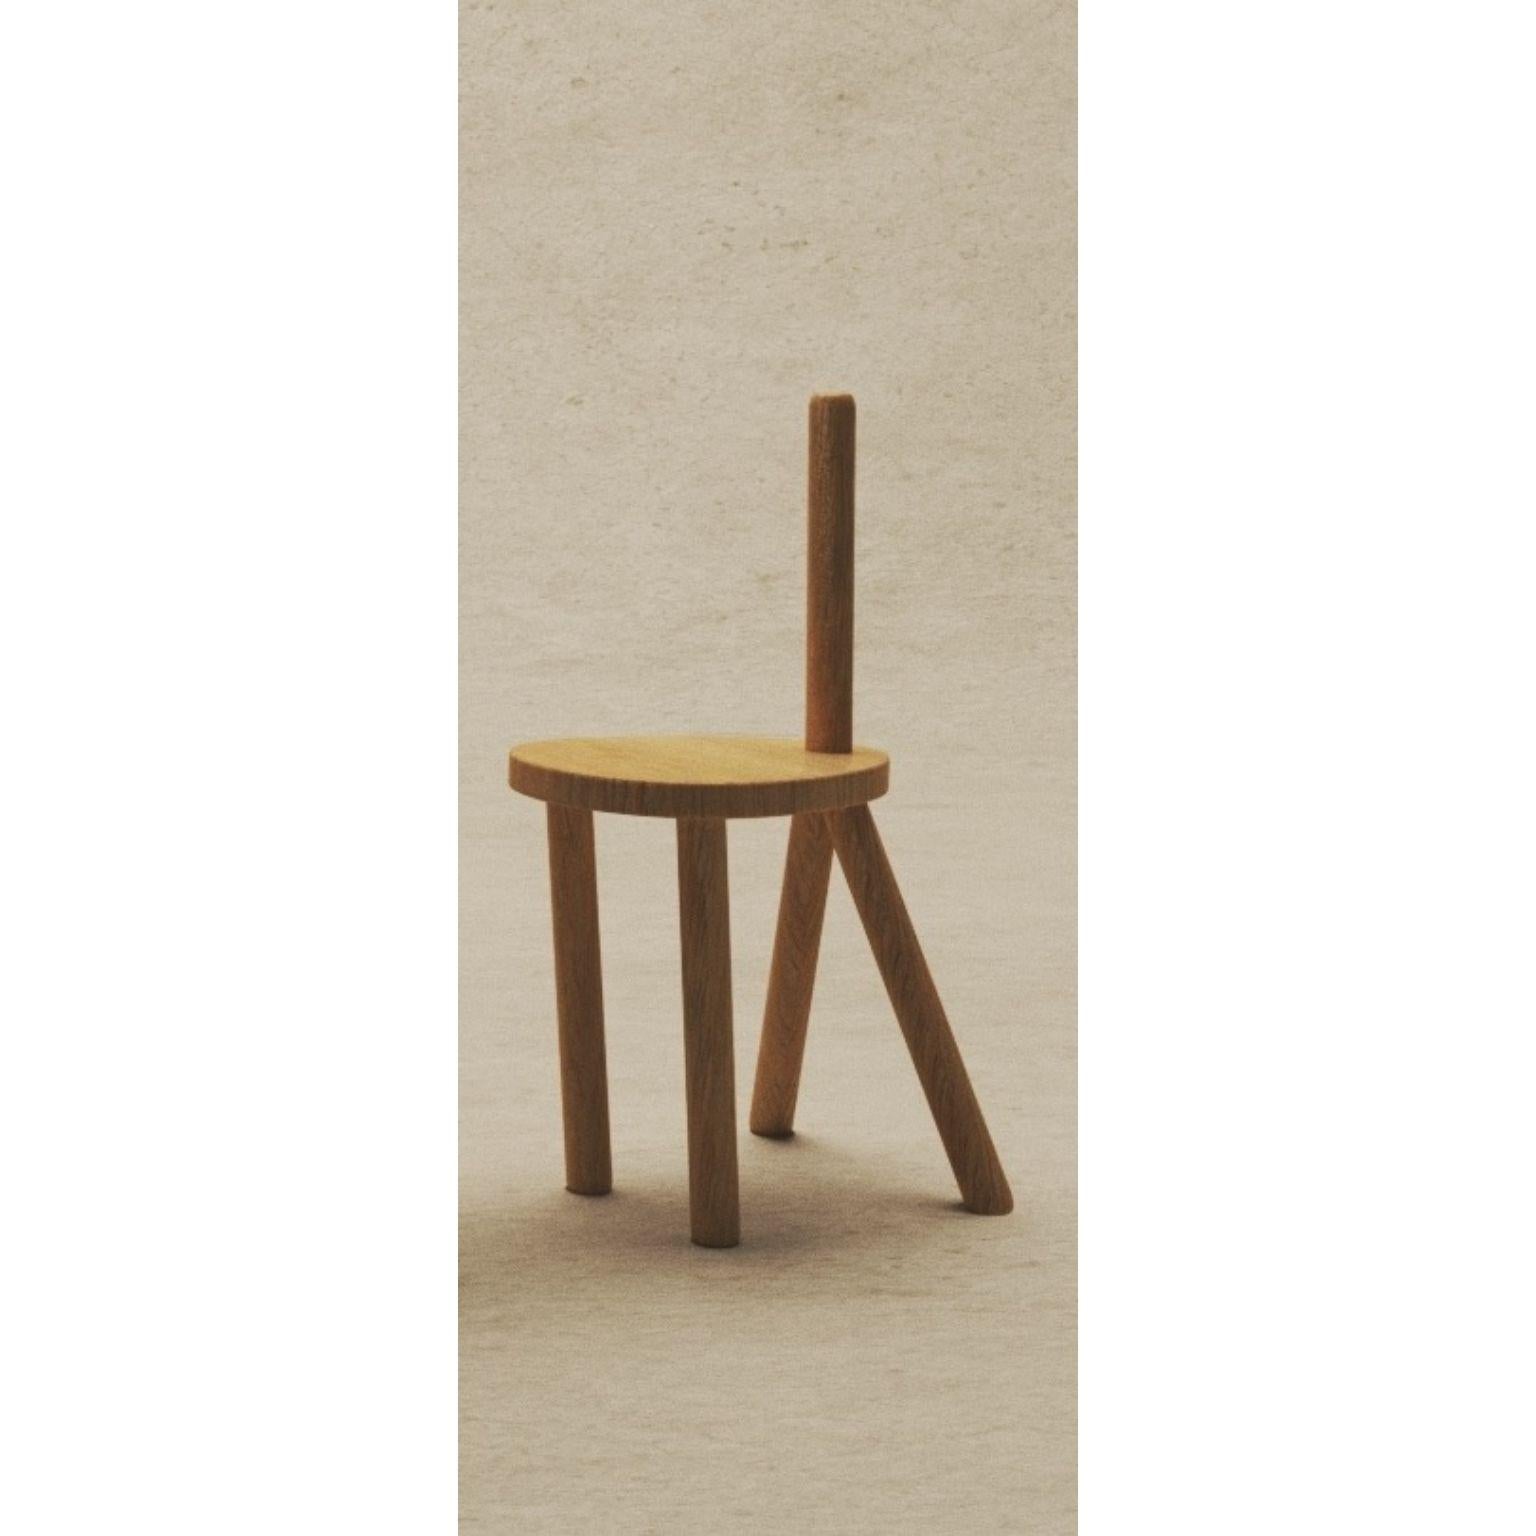 Child The Y Chair by Kilzi
Dimensions: D 25 x W 36 x H 81 cm.
Materials: Wood, Metal.
Weight: 6.5 kg.

All our lamps can be wired according to each country. If sold to the USA it will be wired for the USA for instance.

The name “Y” stands